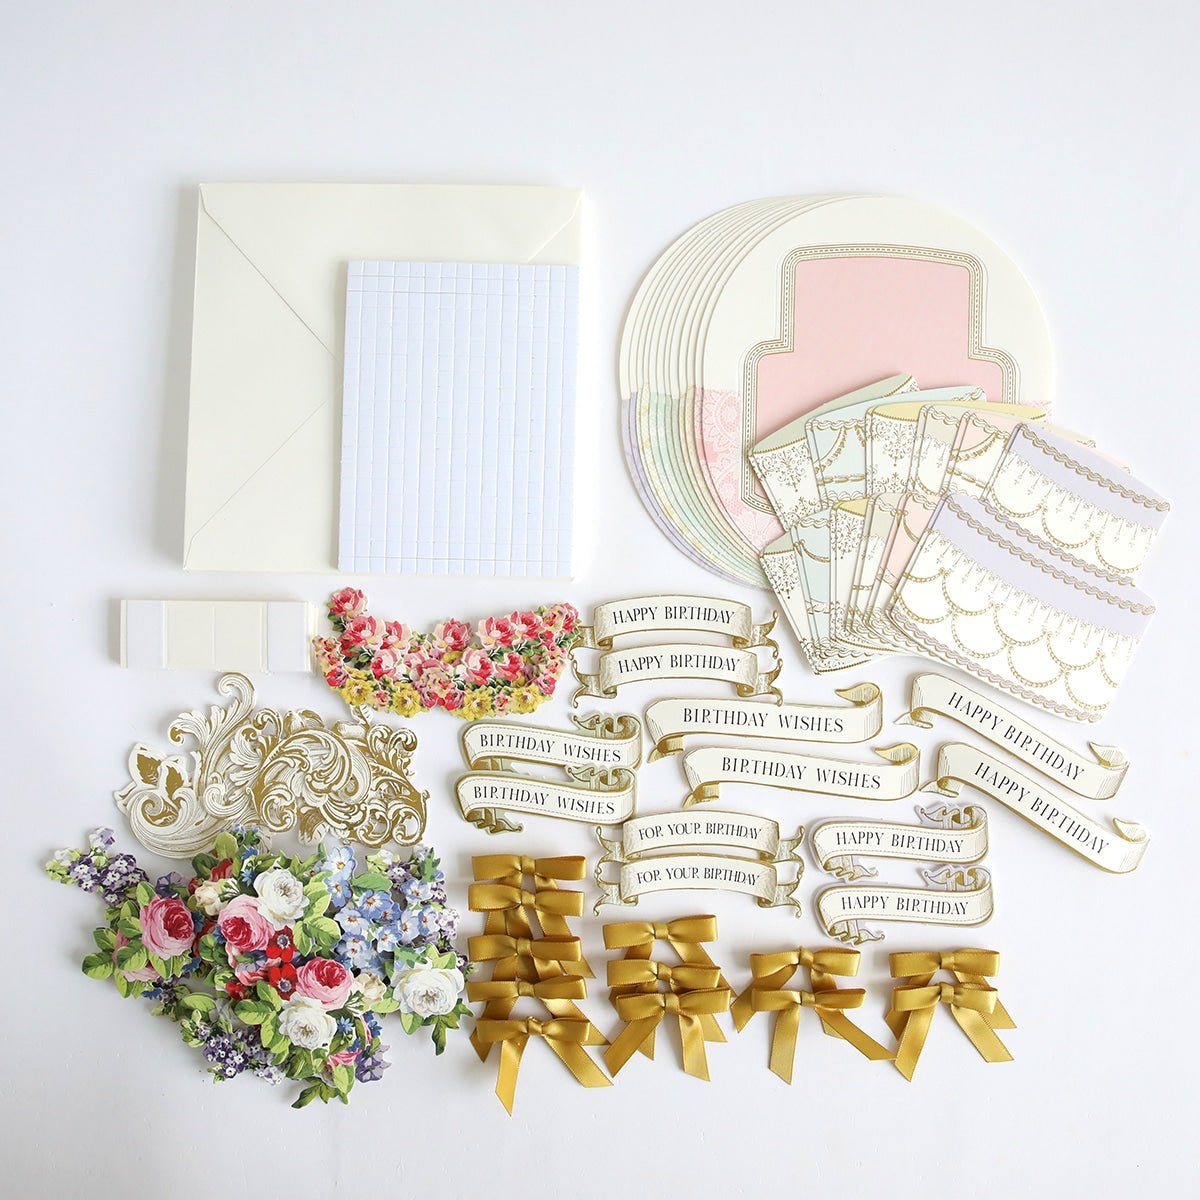 A collection of papers, ribbons, and Simply Rocking Birthday Card Kit are laid out on a white surface.